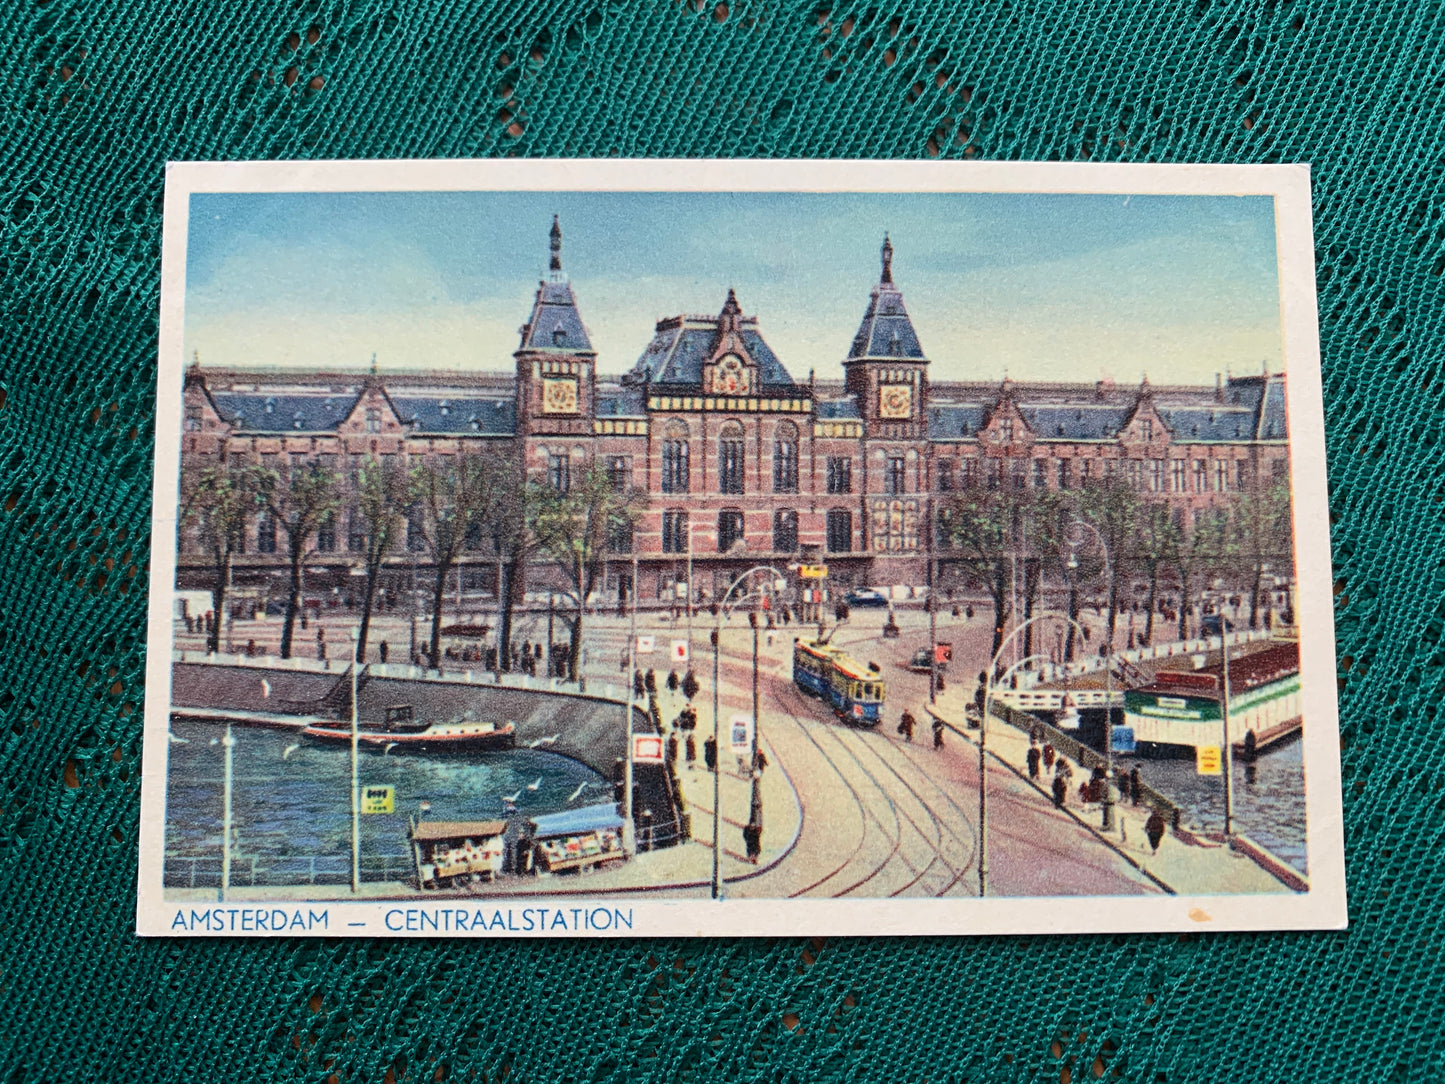 Old postcard - AMSTERDAM - CENTRAL STATION - Holland - Tram - River - early 1900's